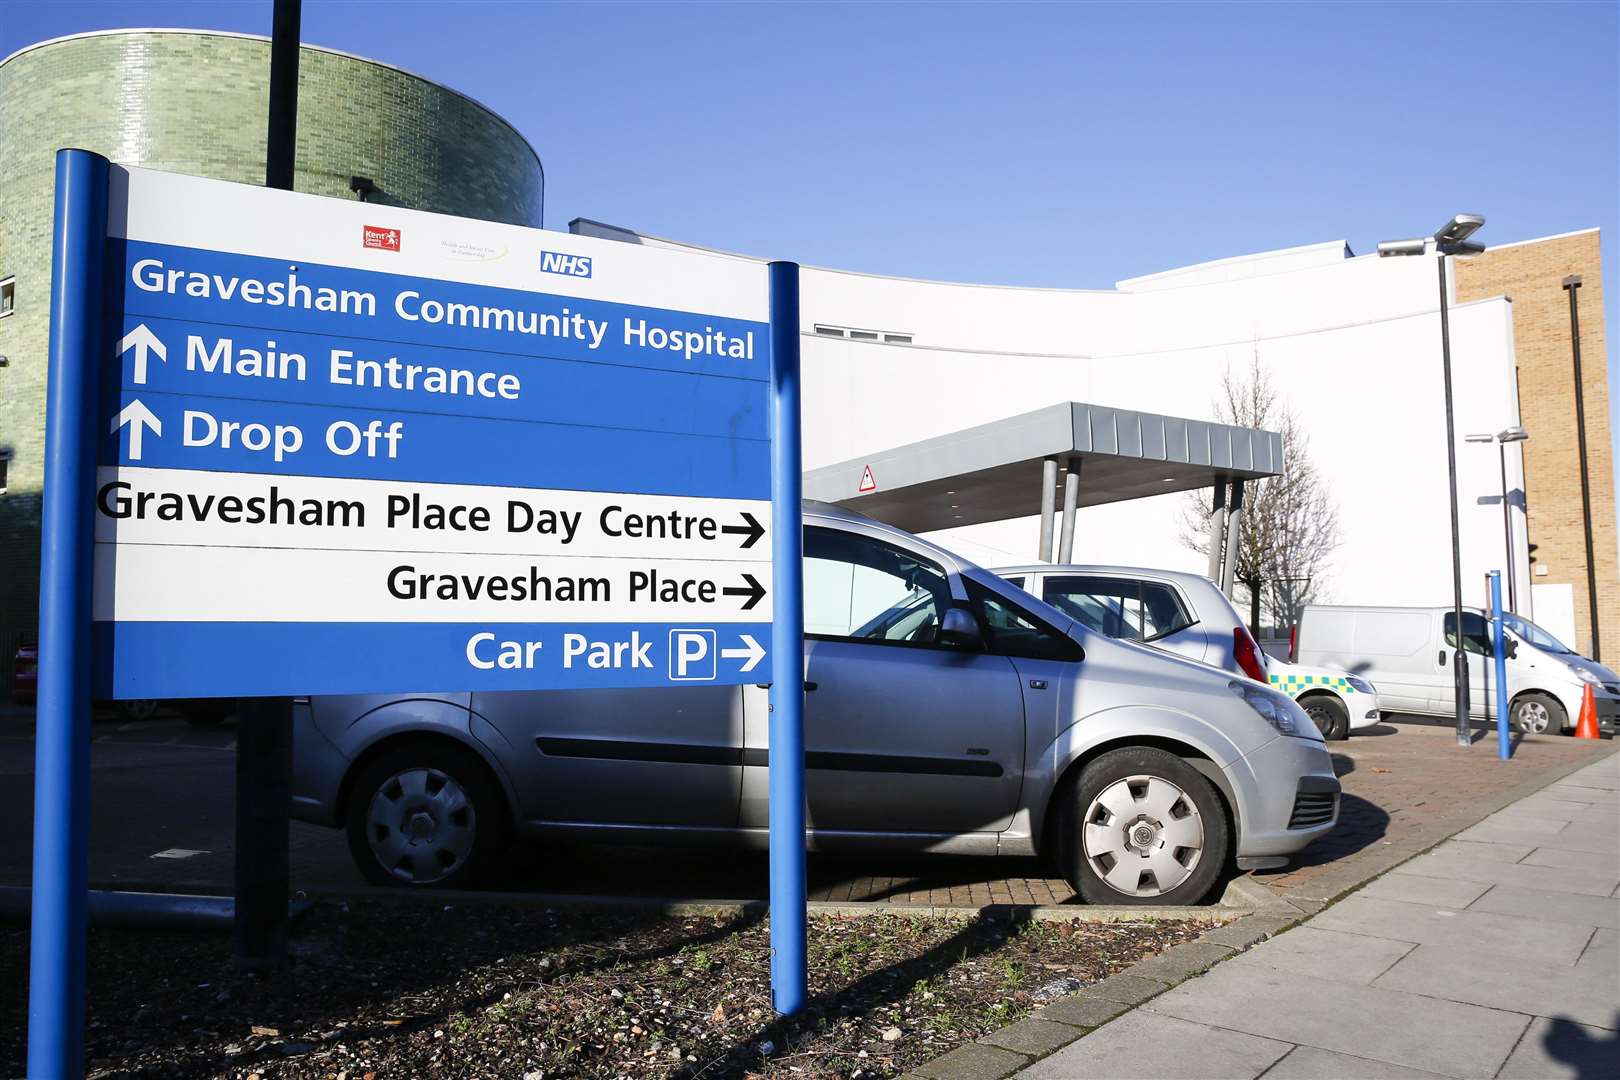 The Gravesham Community Hospital, Bath Street, Gravesend is one of the sites proposed. Picture: Martin Apps